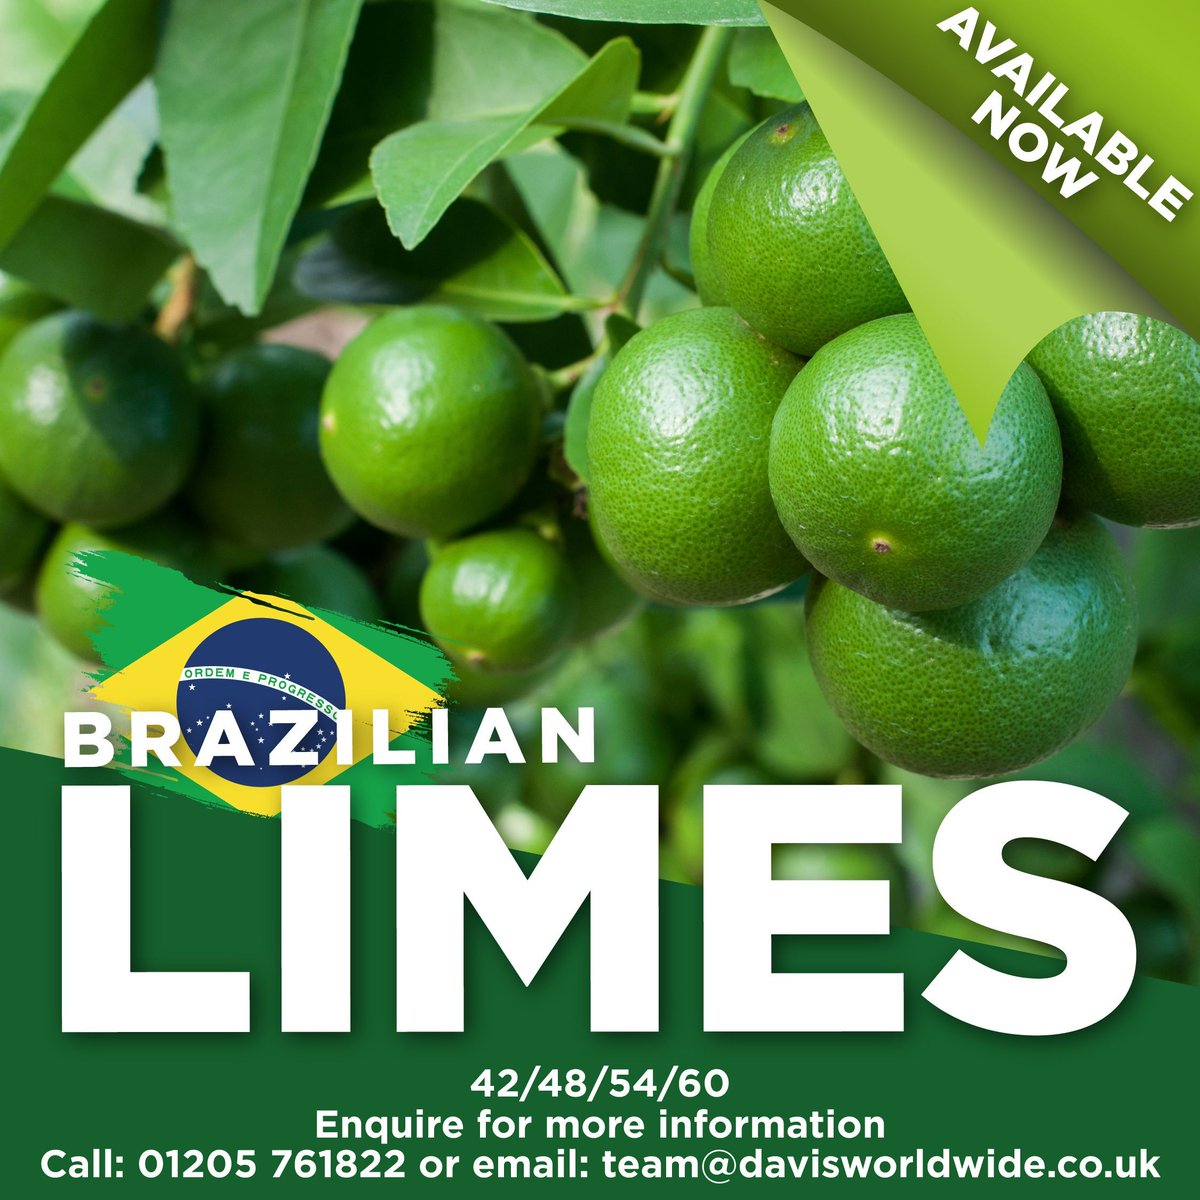 Brazilian Limes, Available Now, Providing more than 20% of your daily needs, eating Limes or drinking Lime juice may improve your immunity!

Enquire for further information call 01205 761822 or email team@davisworldwide.co.uk

#limes #limesfestival #lime #Brazil #juicy #crispy